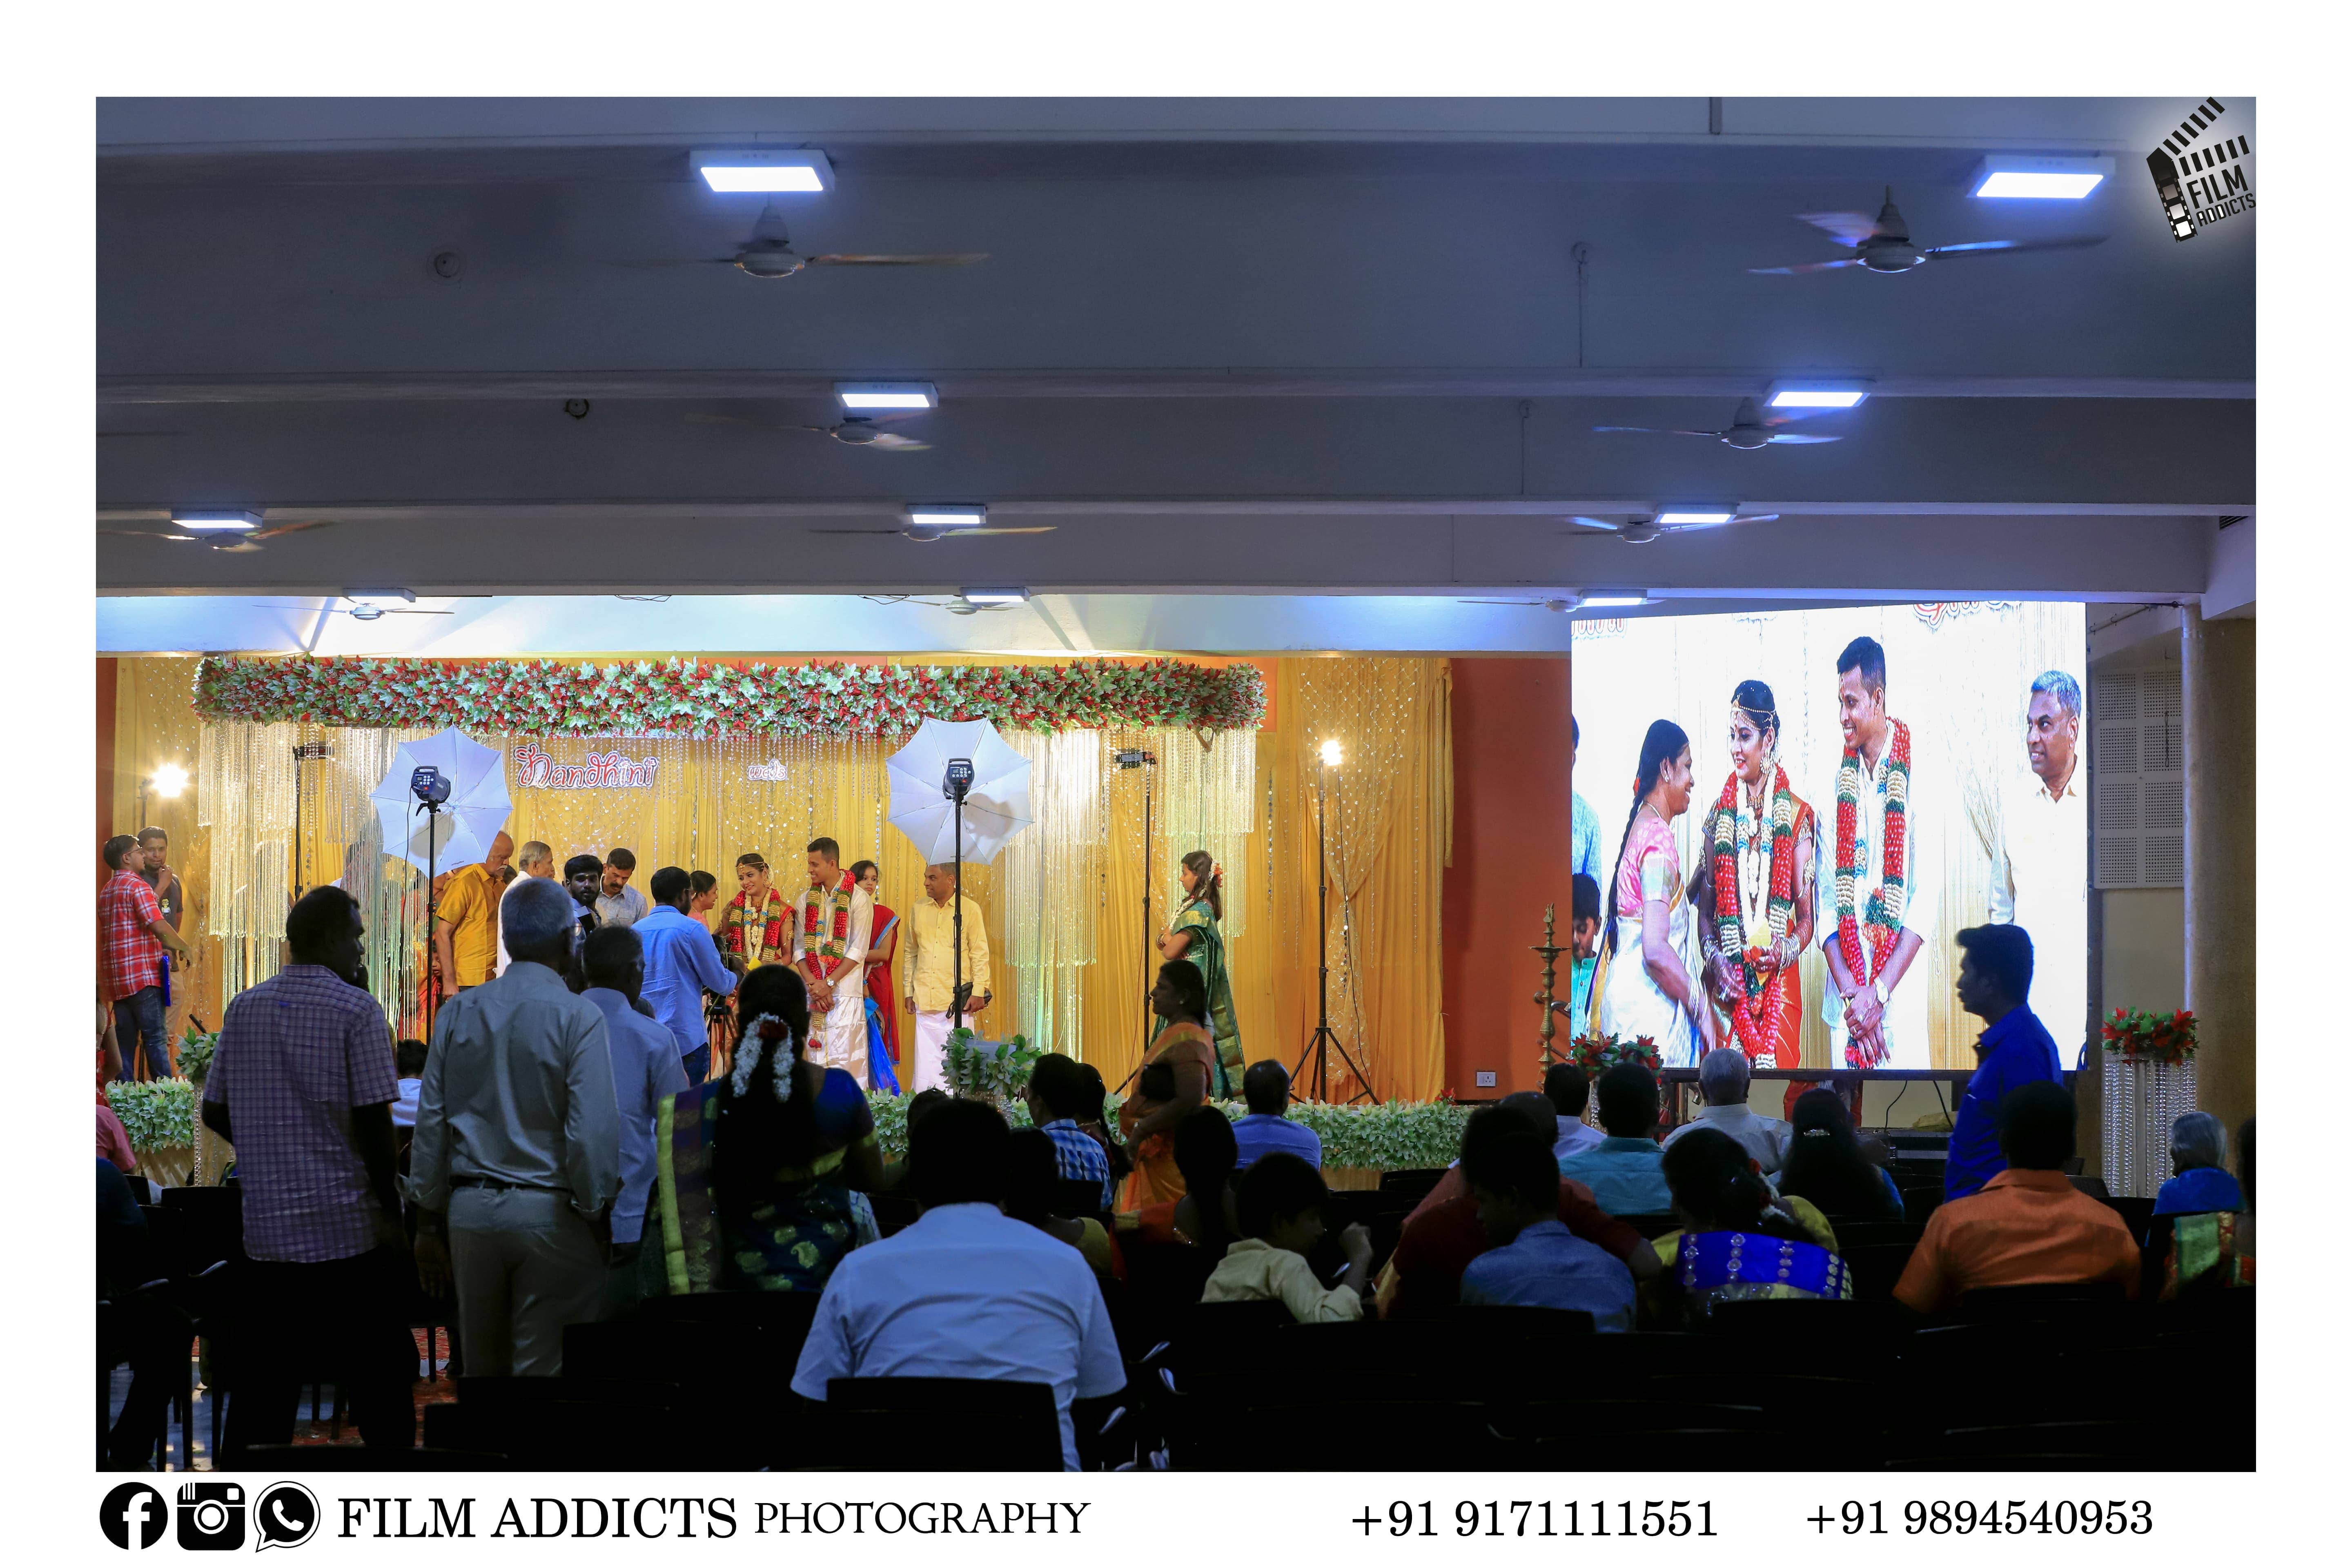 Led wall in Thanjavur, Led wall rental in Thanjavur, Led wall display in Thanjavur, Led wall wedding in Thanjavur, Led wall for wedding reception, Led wall event in Thanjavur, Led wall event management in Thanjavur, Led video wall for events in Thanjavur, led video wall rental in Thanjavur, wedding led video wall rental & hiring Thanjavur, marriage led video wall rental & hiring in Thanjavur, wedding led screen rental Thanjavur, marriage led screen Thanjavur, indoor & outdoor led video wall in Thanjavur, led wall in marriage, led wall rental in Thanjavur, led rental, led video wall hiring Thanjavur, marriage led screen, wedding led screen rental,live streaming in Thanjavur, live streaming, live tv, live streaming wedding, wedding live streaming Thanjavur, marriage live streaming Thanjavur, live streaming services in Thanjavur, live streaming wedding Thanjavur.